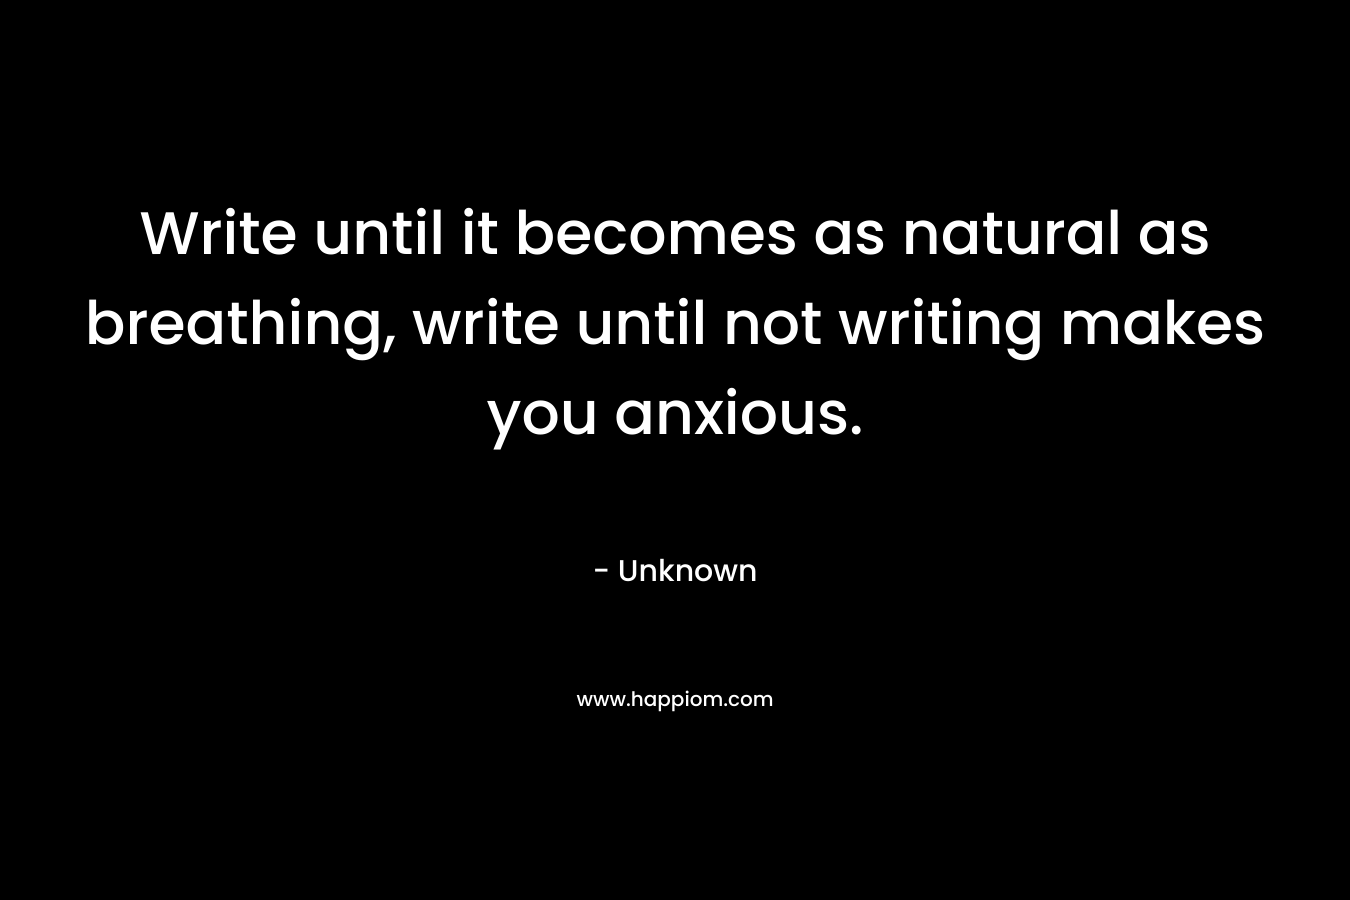 Write until it becomes as natural as breathing, write until not writing makes you anxious. – Unknown